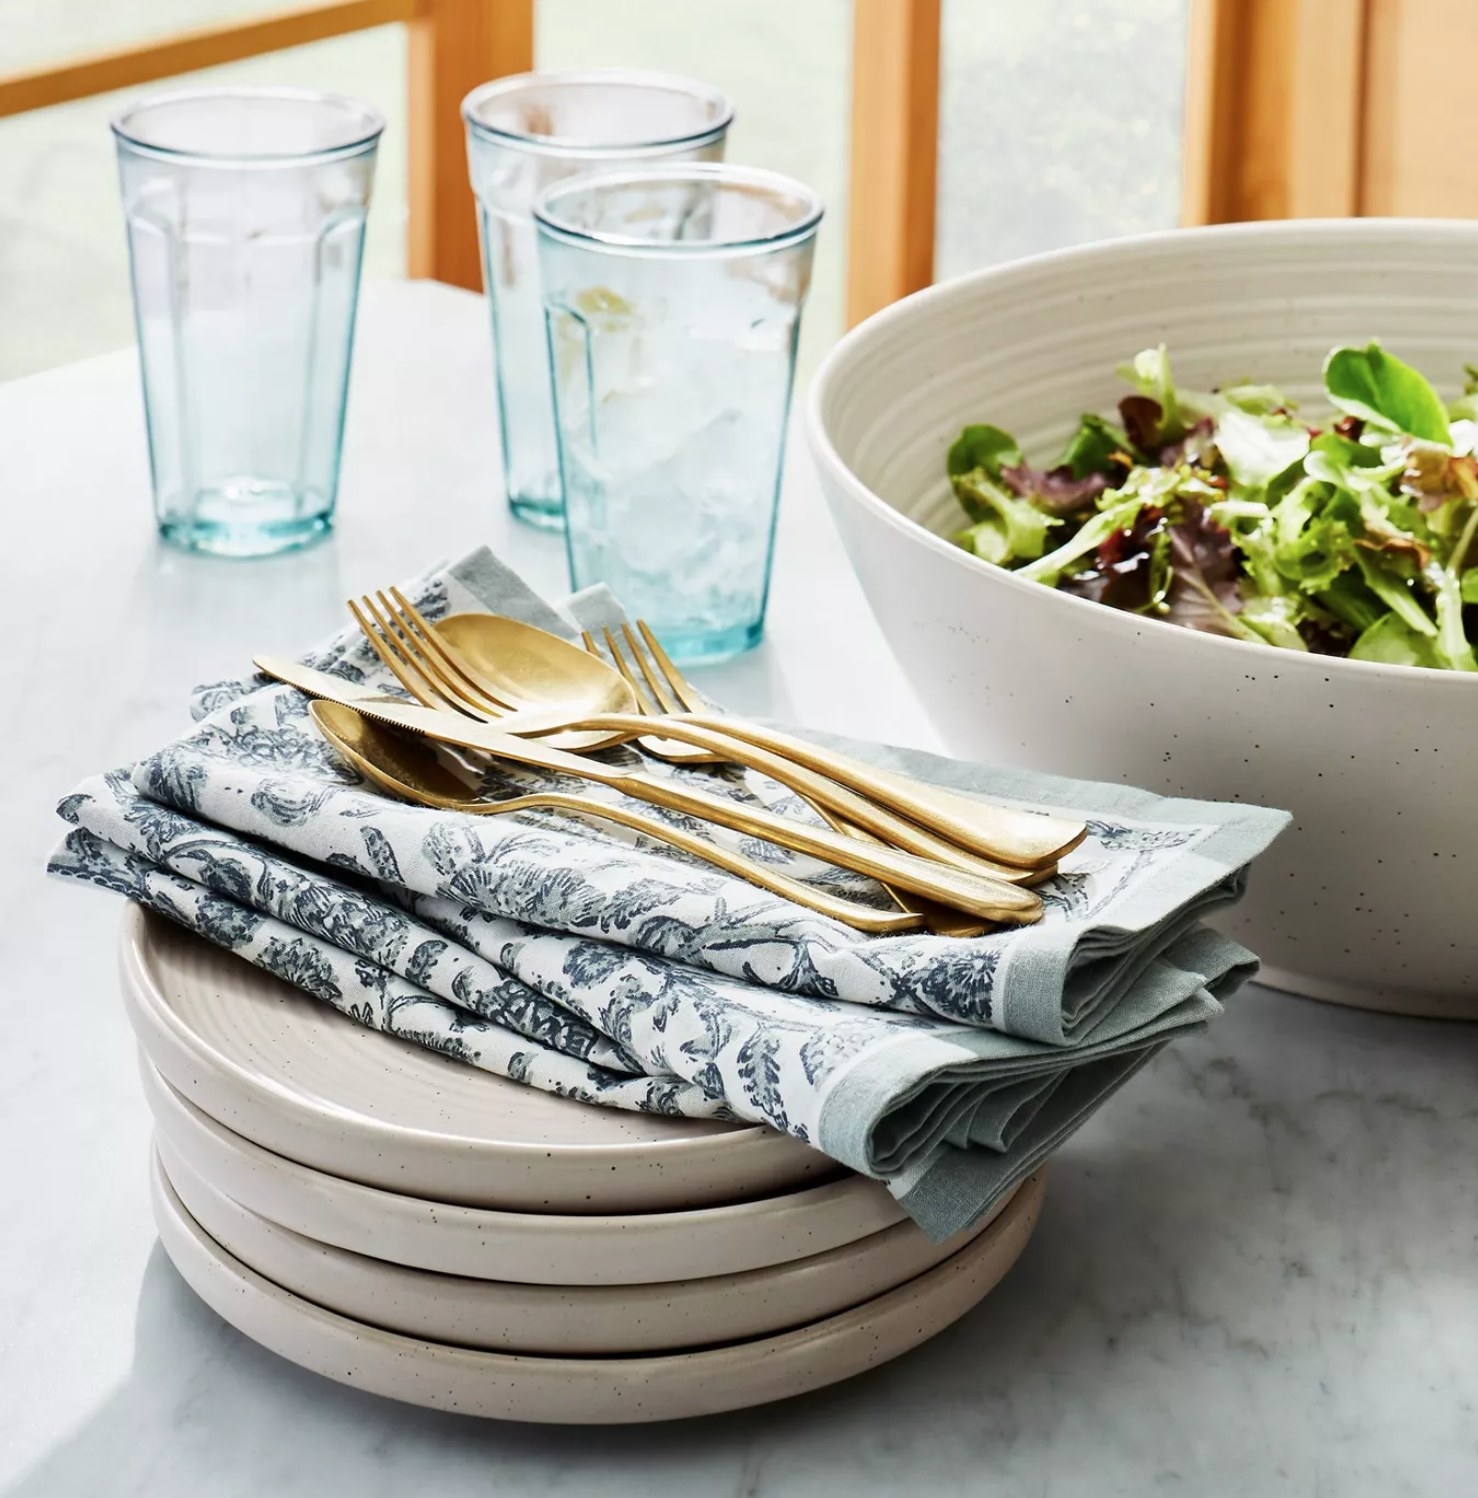 the four pack of plates with a napkin and silverware on top and a salad bowl next to the plates